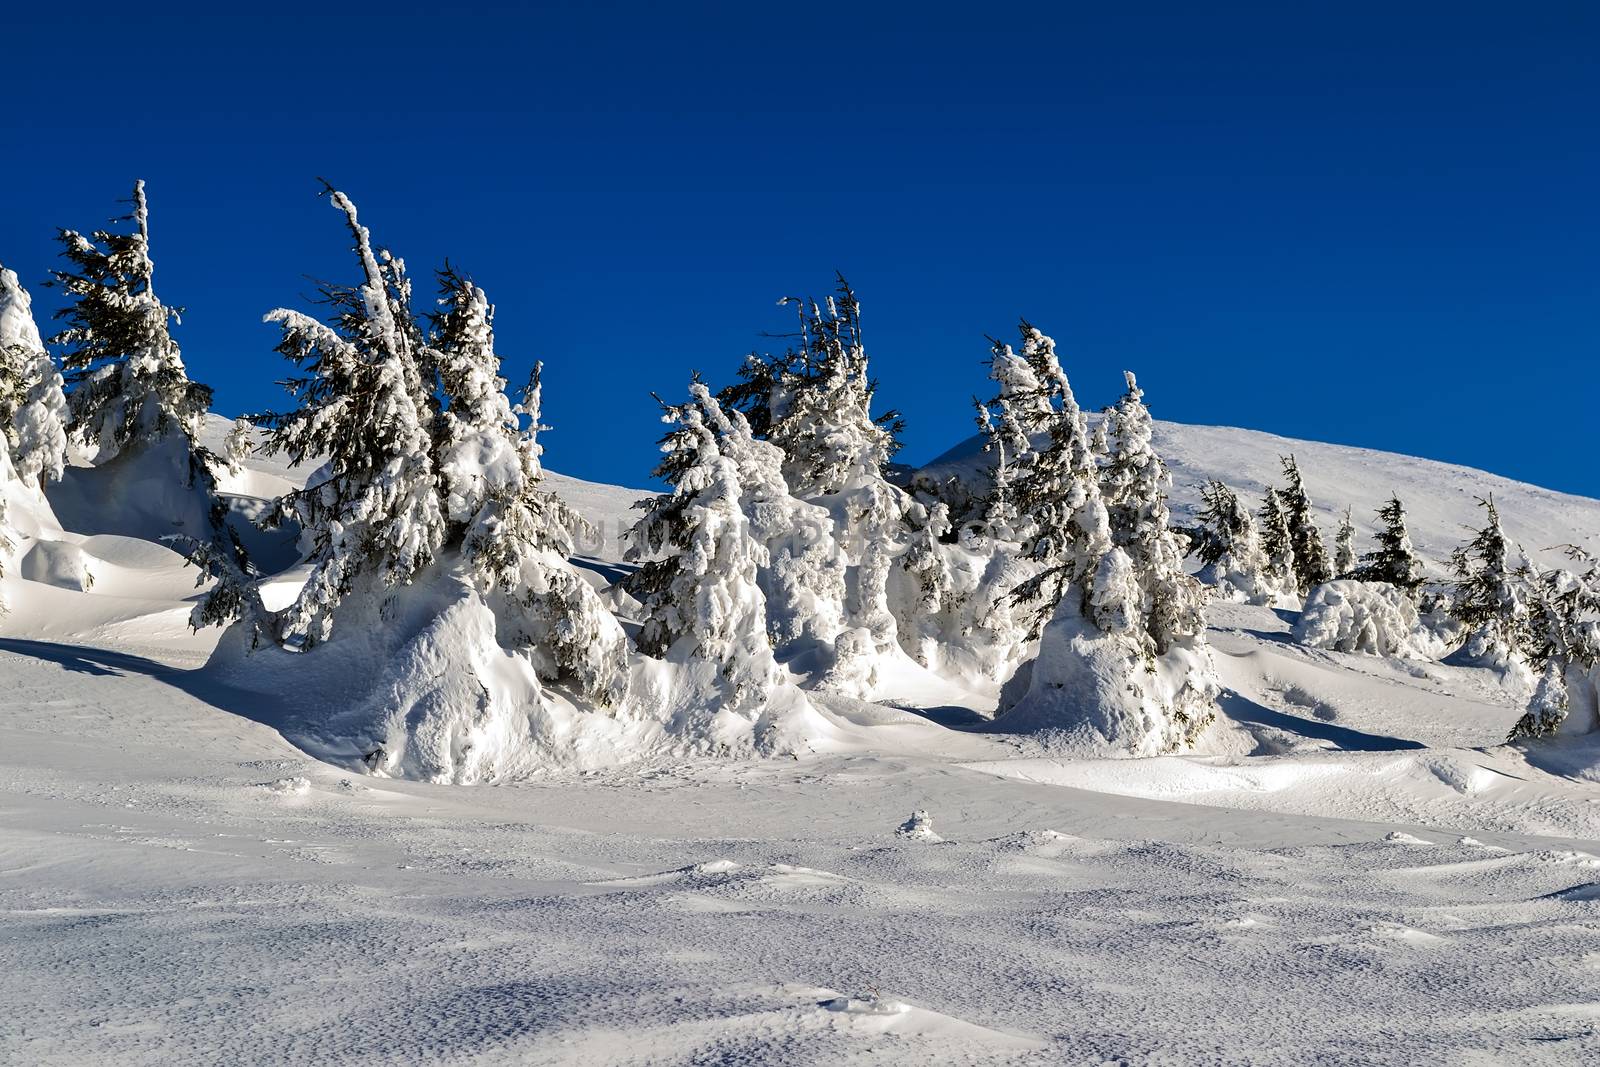 View of the snow covered trees in the mountains. Blue sky. Carpathians. Ukraine